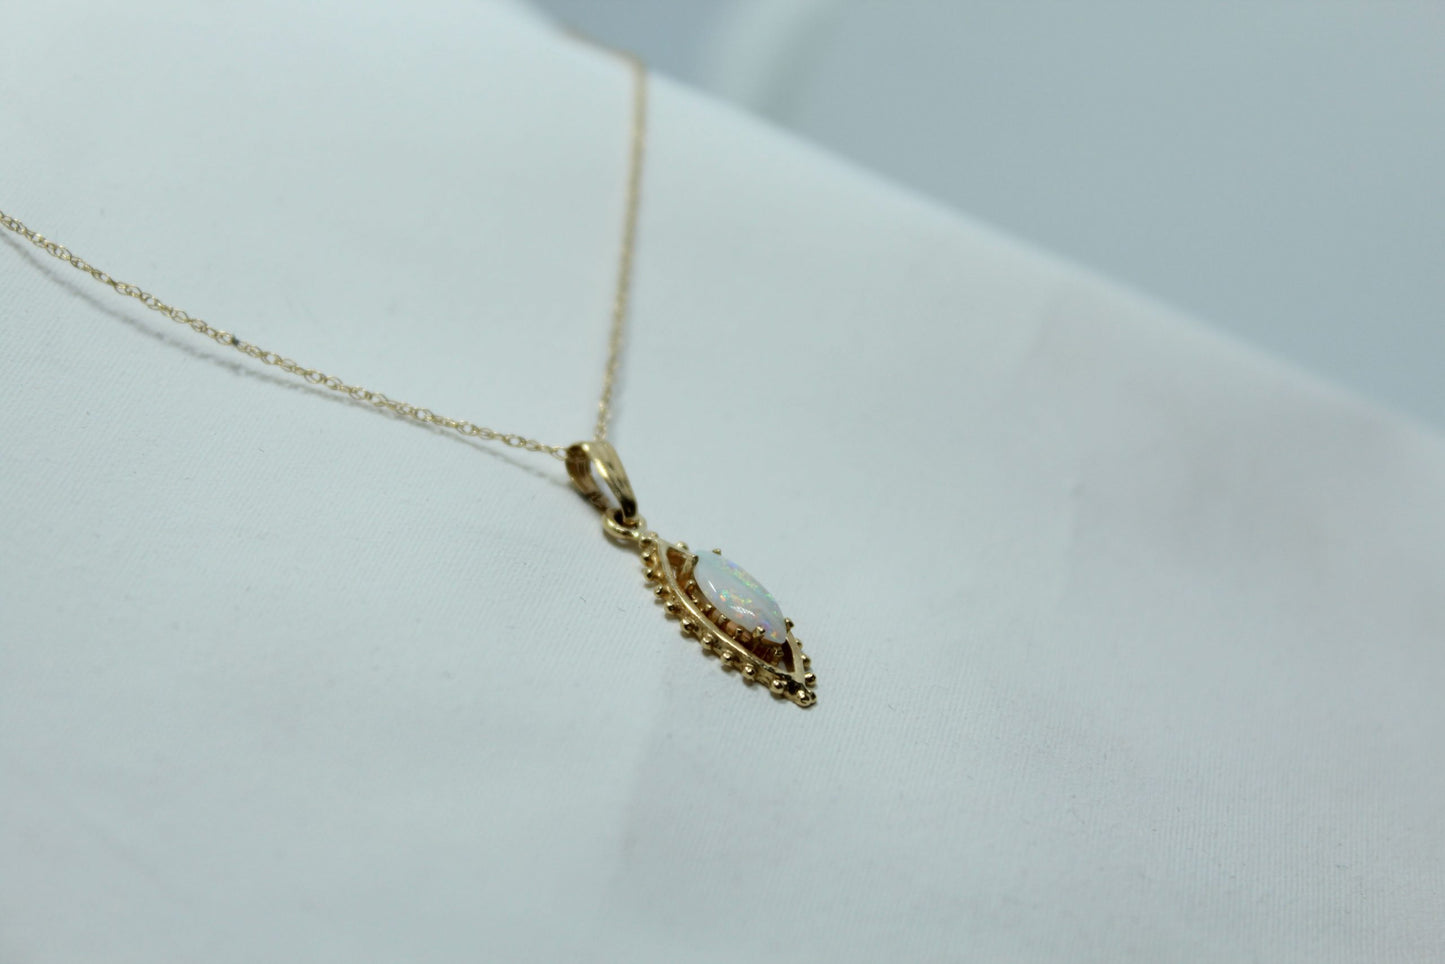 14KT PENDANT AND CHAIN